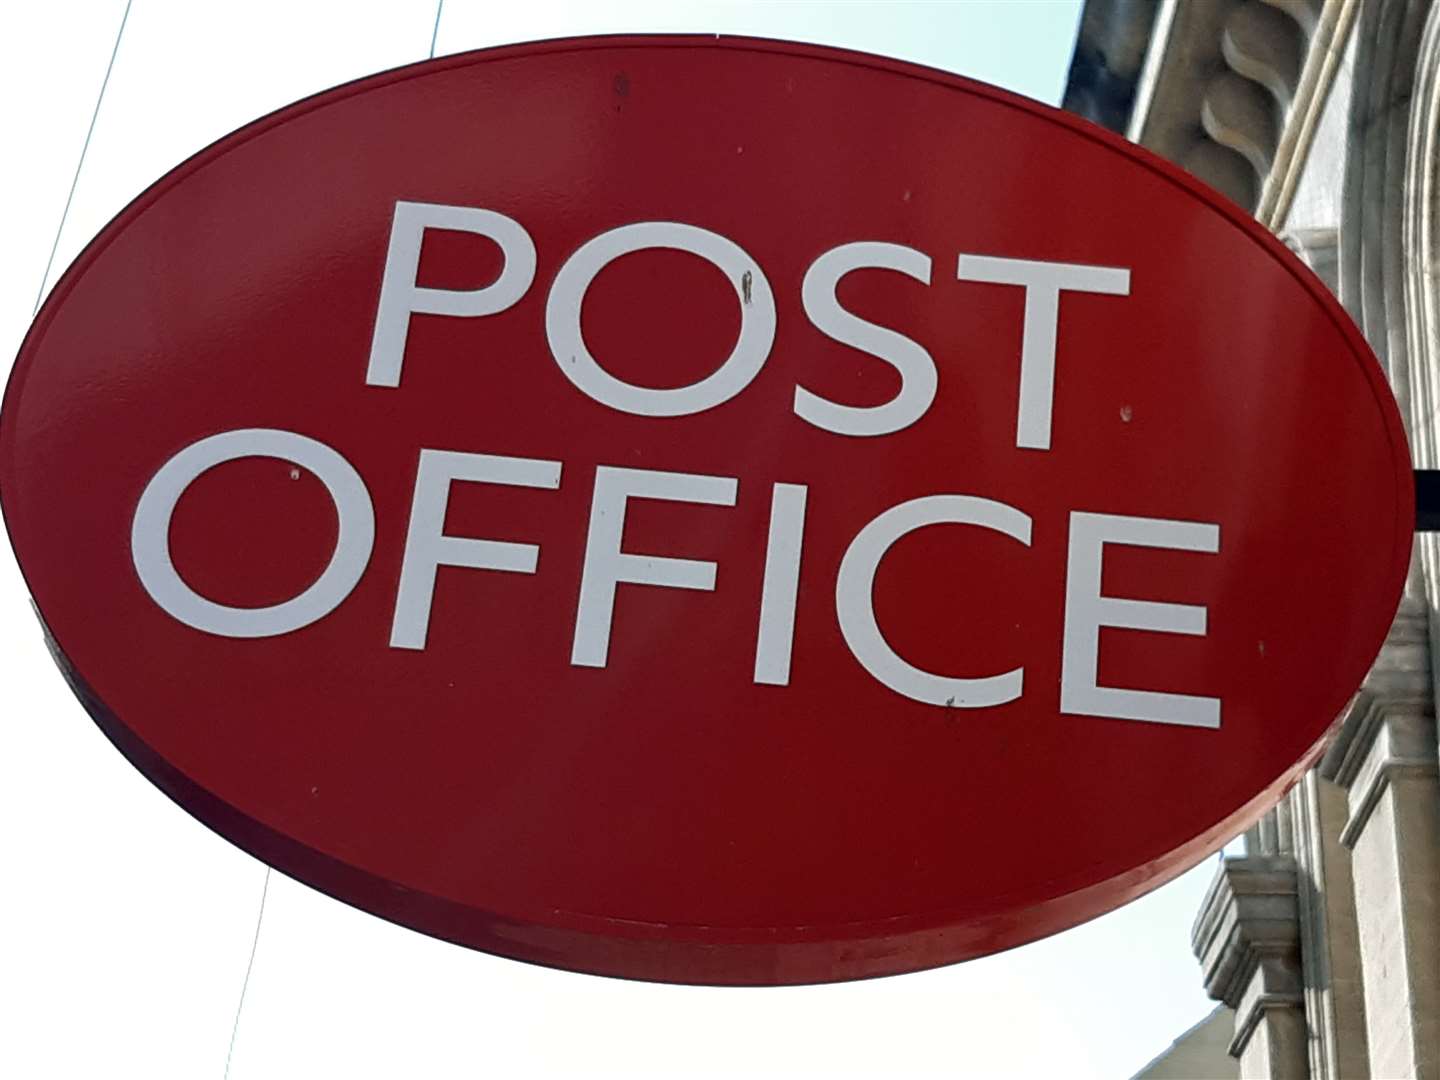 The Post Office is among the organisations to express concern at any potential move to a more cashless society